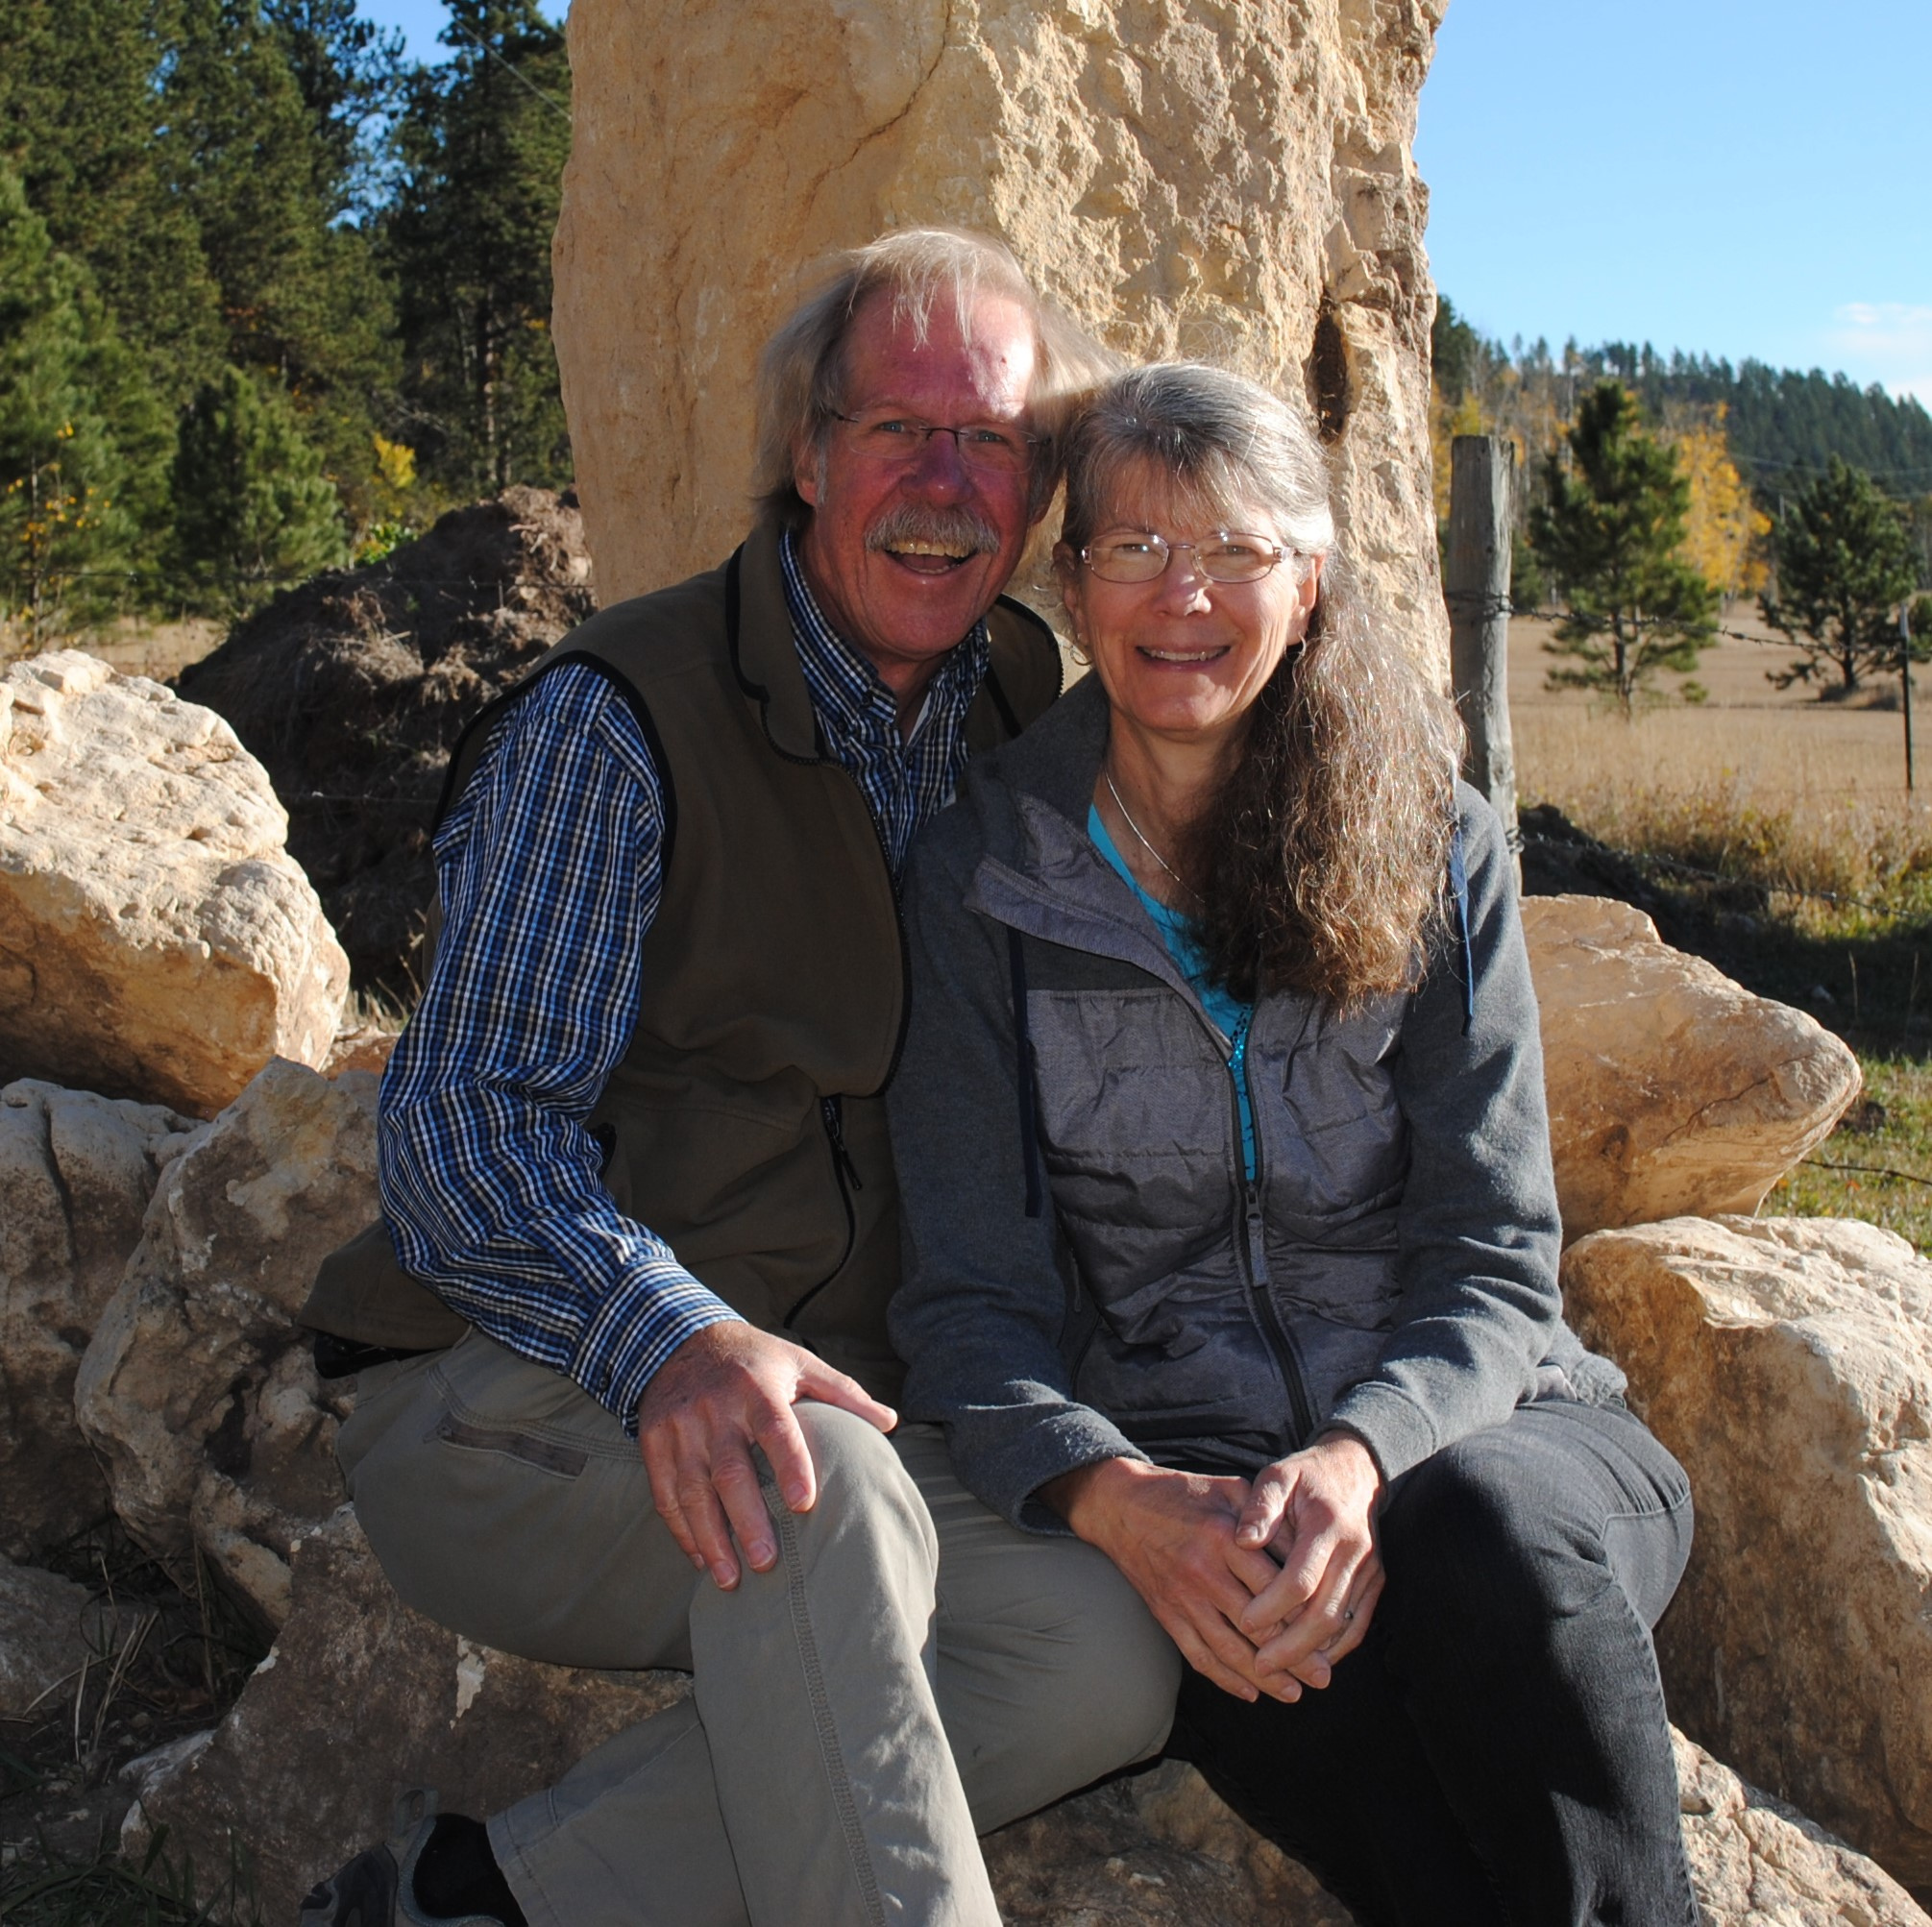 Rod and Deb - New Trails Ministry, Inc.